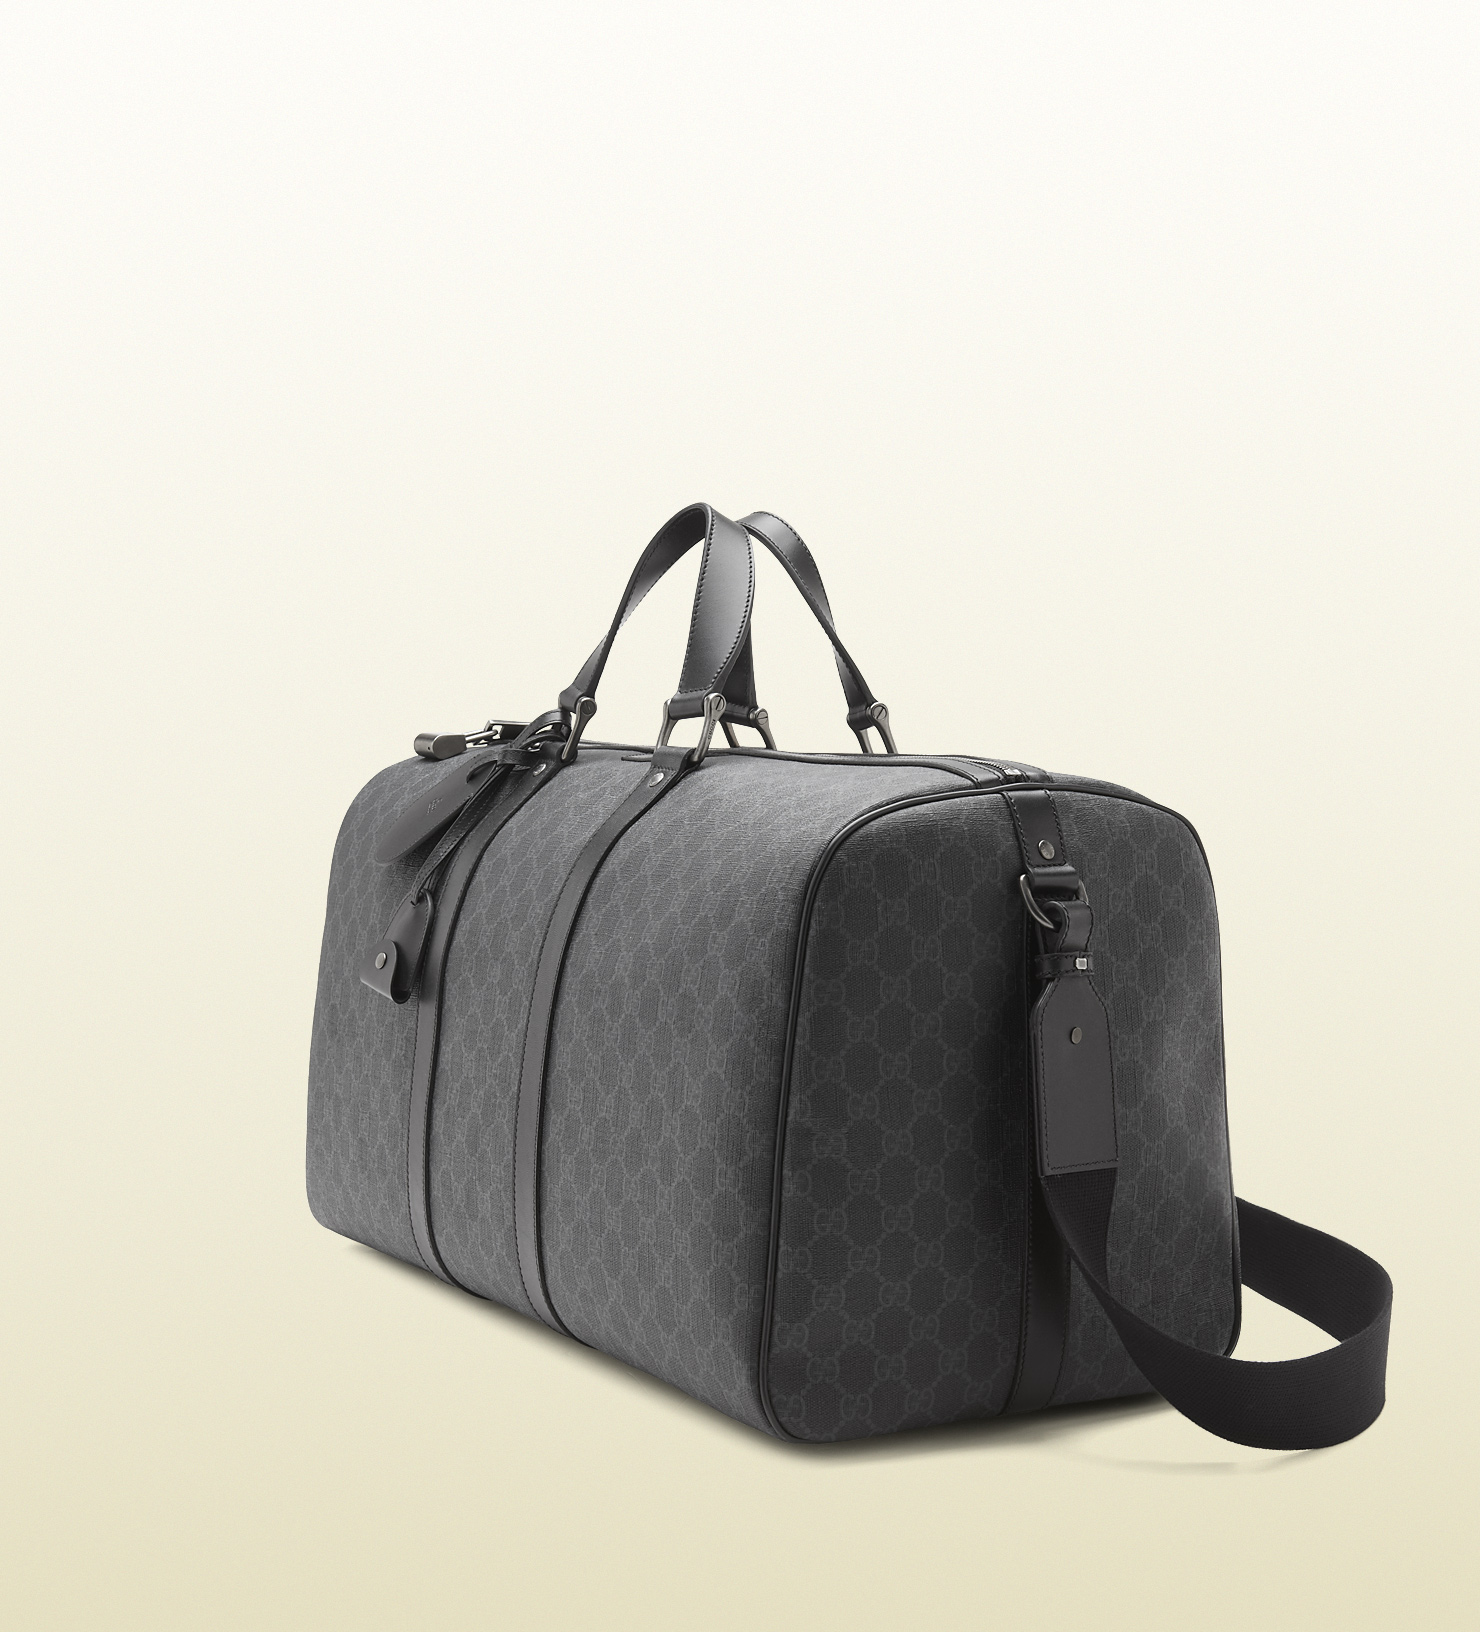 Lyst - Gucci Gg Supreme Canvas Carry-on Duffle Bag in Gray for Men